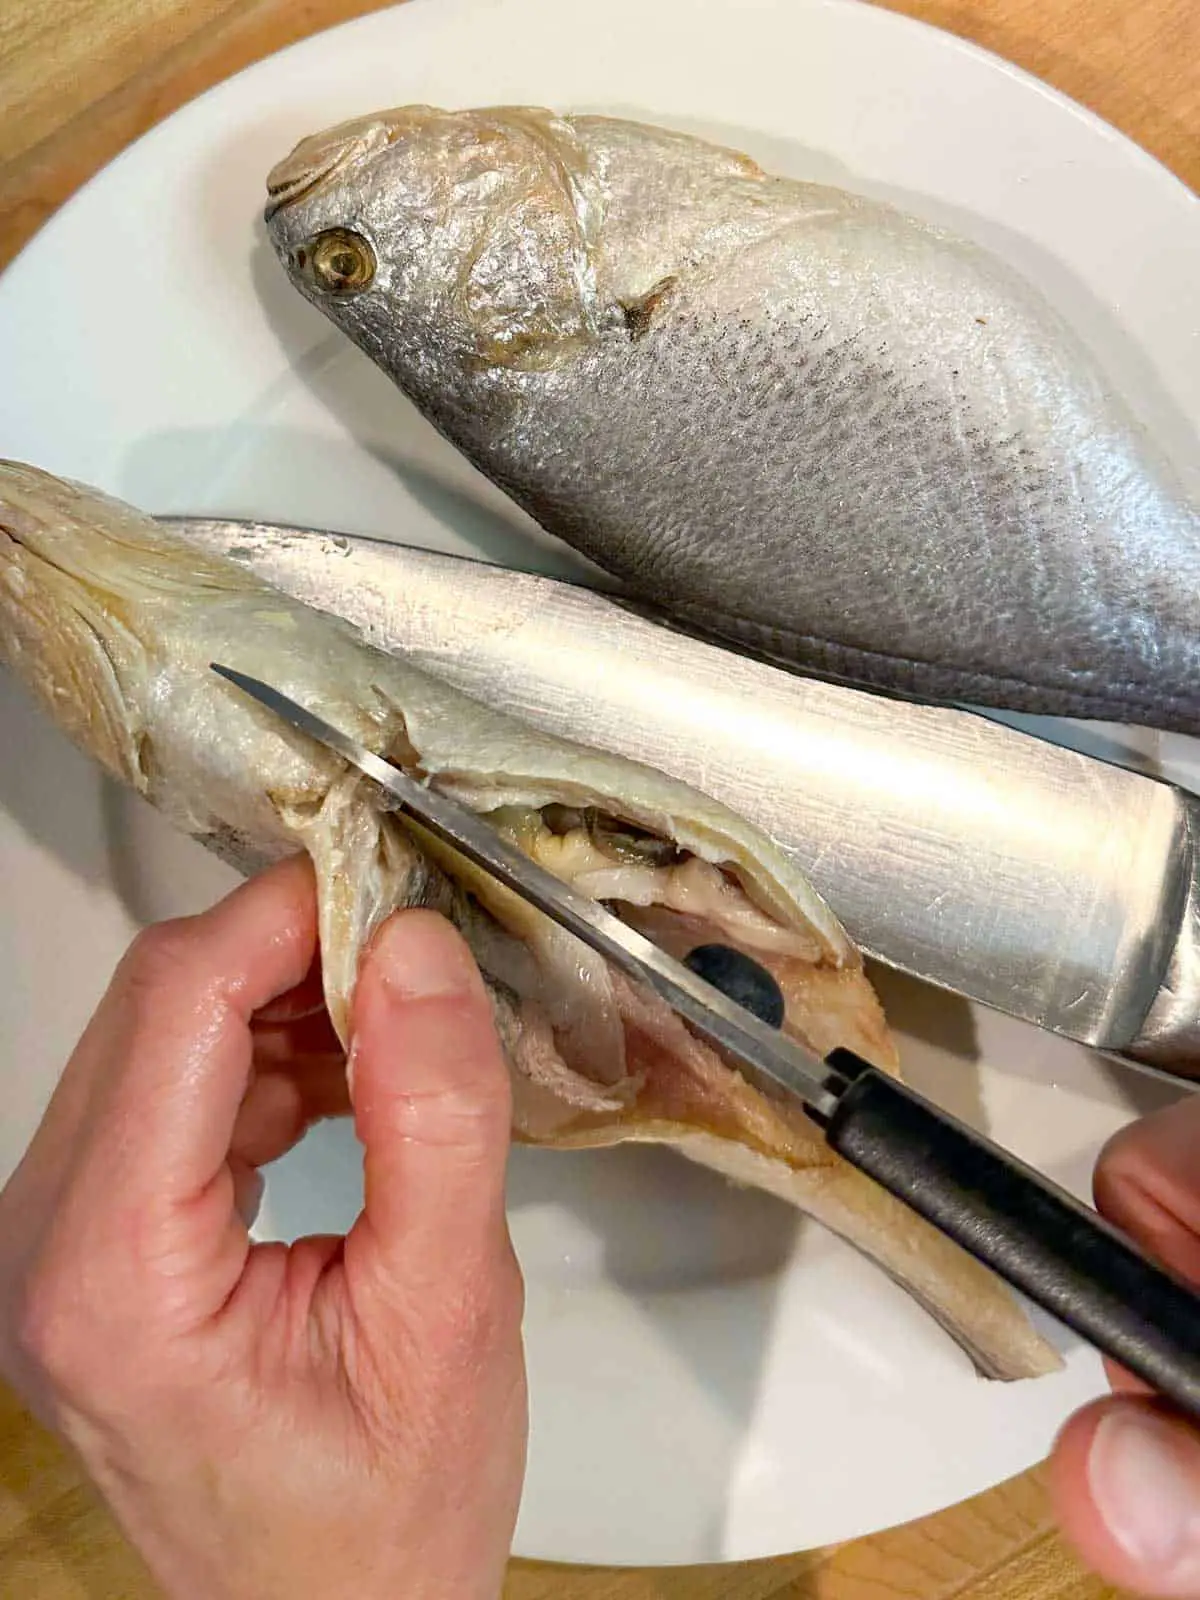 Two corvina fish on a white plate with a knife between the fish. Someone is using a pair of scissors to cut a hard part of the fish located on the underside just below the head.